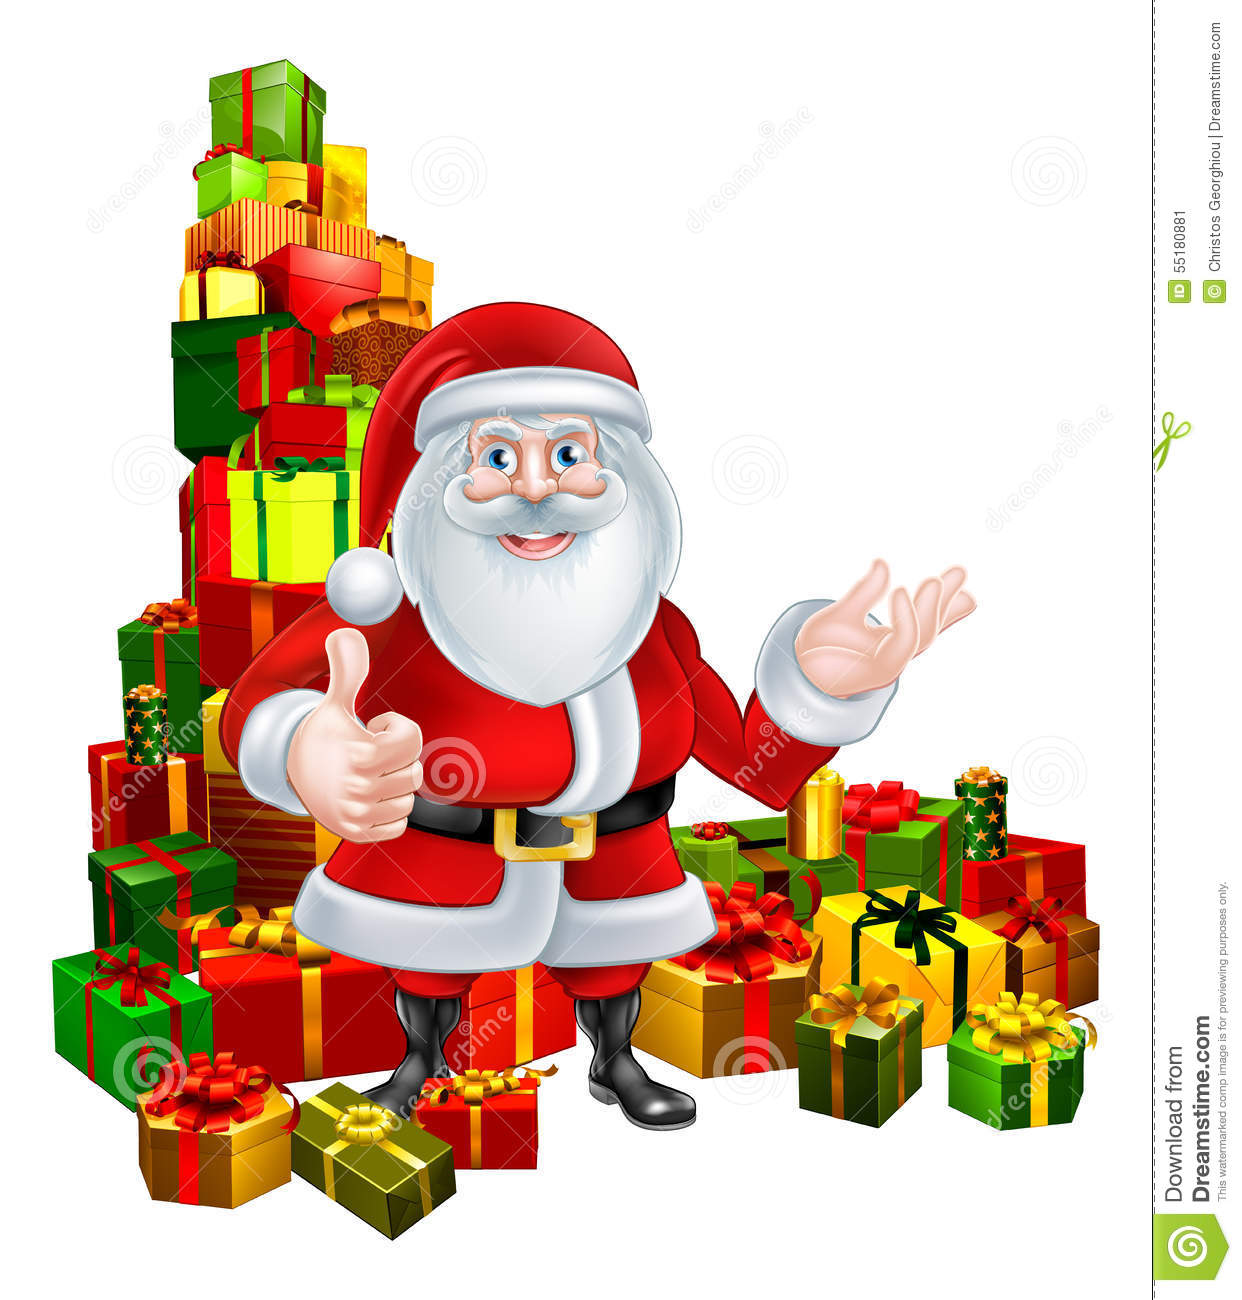 Thumbs Up Standing In The Middle Of A Huge Stack Of Presents Or Gifts